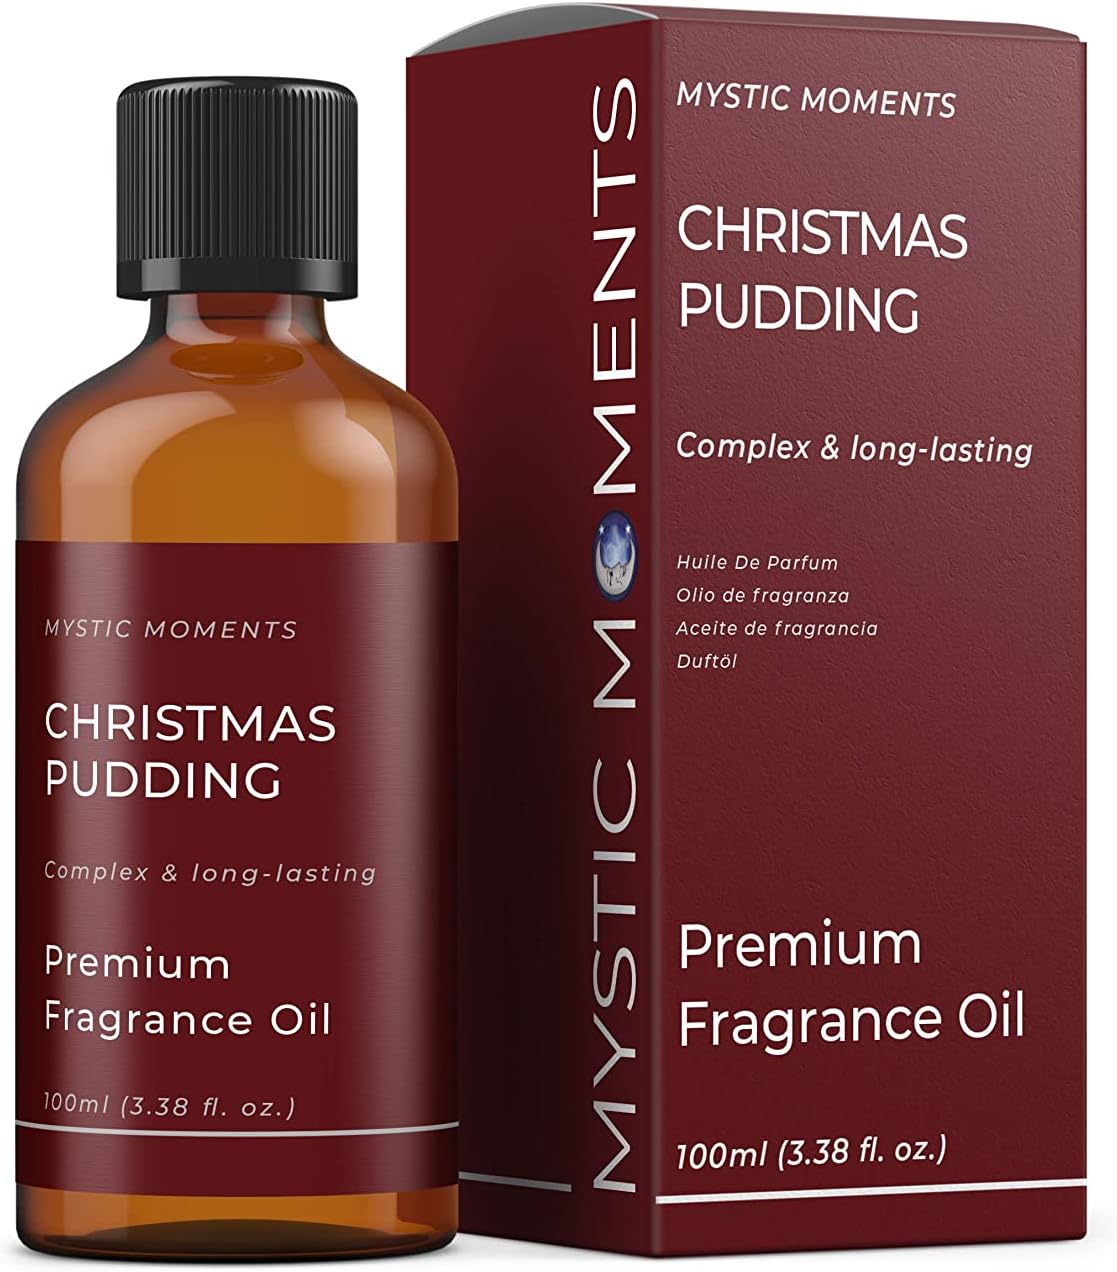 Mystic Moments Christmas Pudding Fragrance Oil - 100ml - Perfect for Soaps, Candles, Bath Bombs, Oil Burners, Diffusers and Skin & Hair Care Items